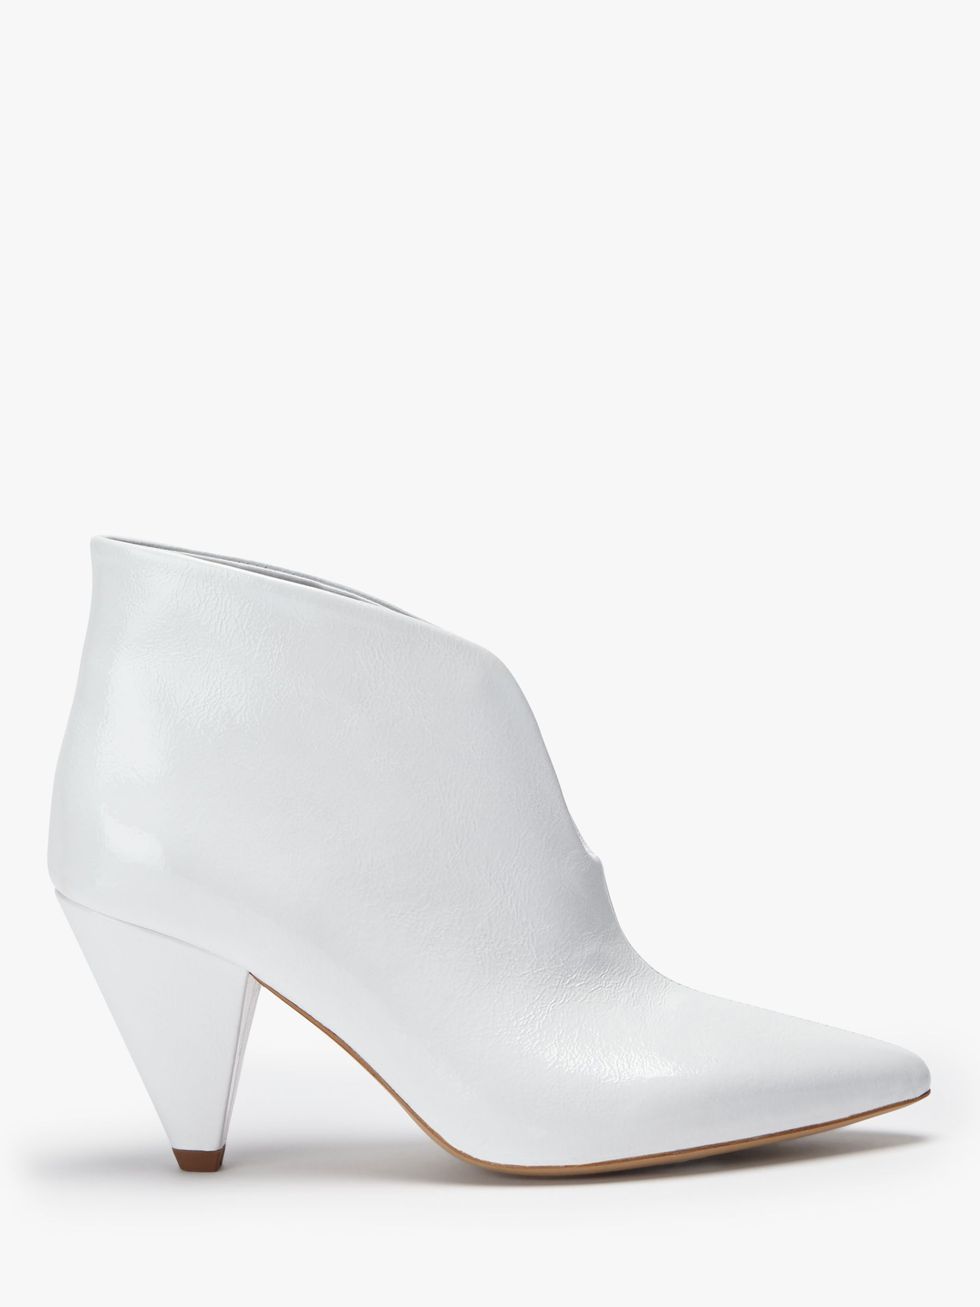 Kin Poppy Cone Heel Ankle Boots, White Patent Leather